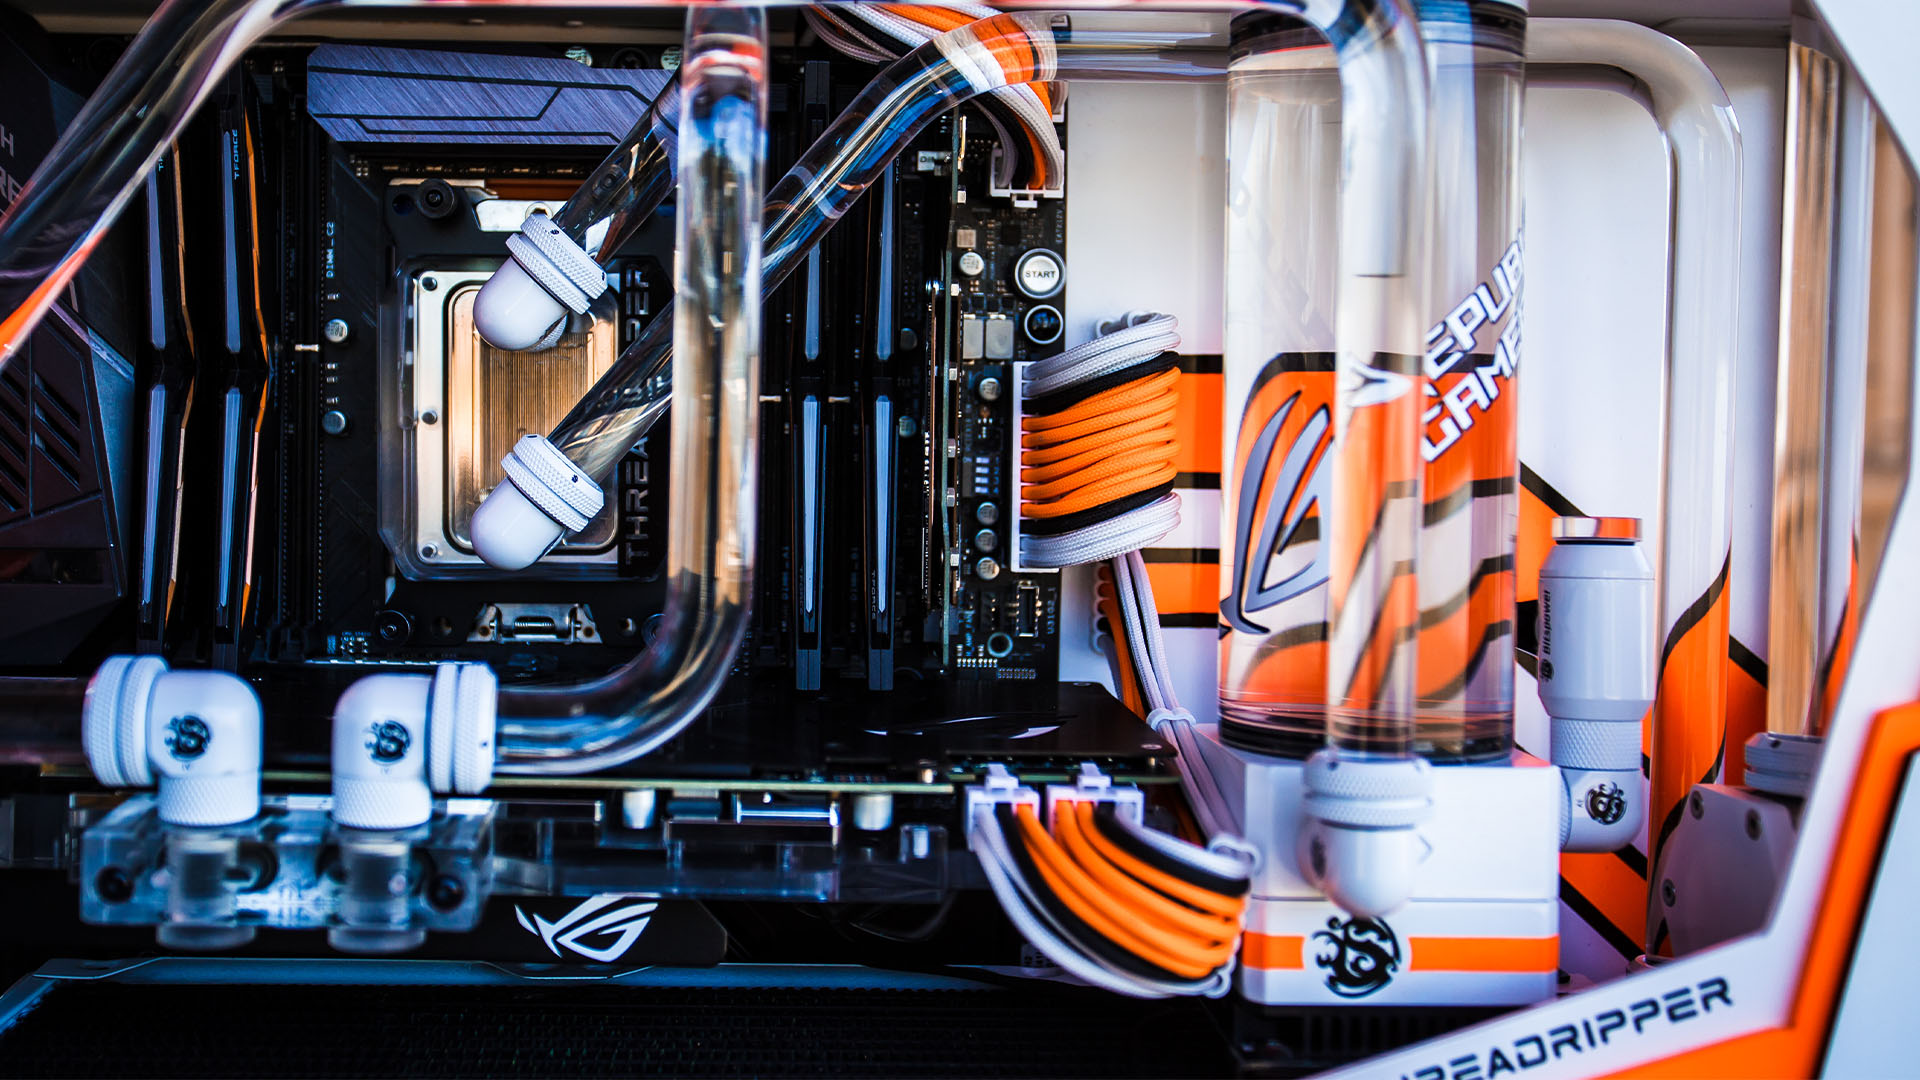 The inside of the threadripper gaming PC, complete with custom cables